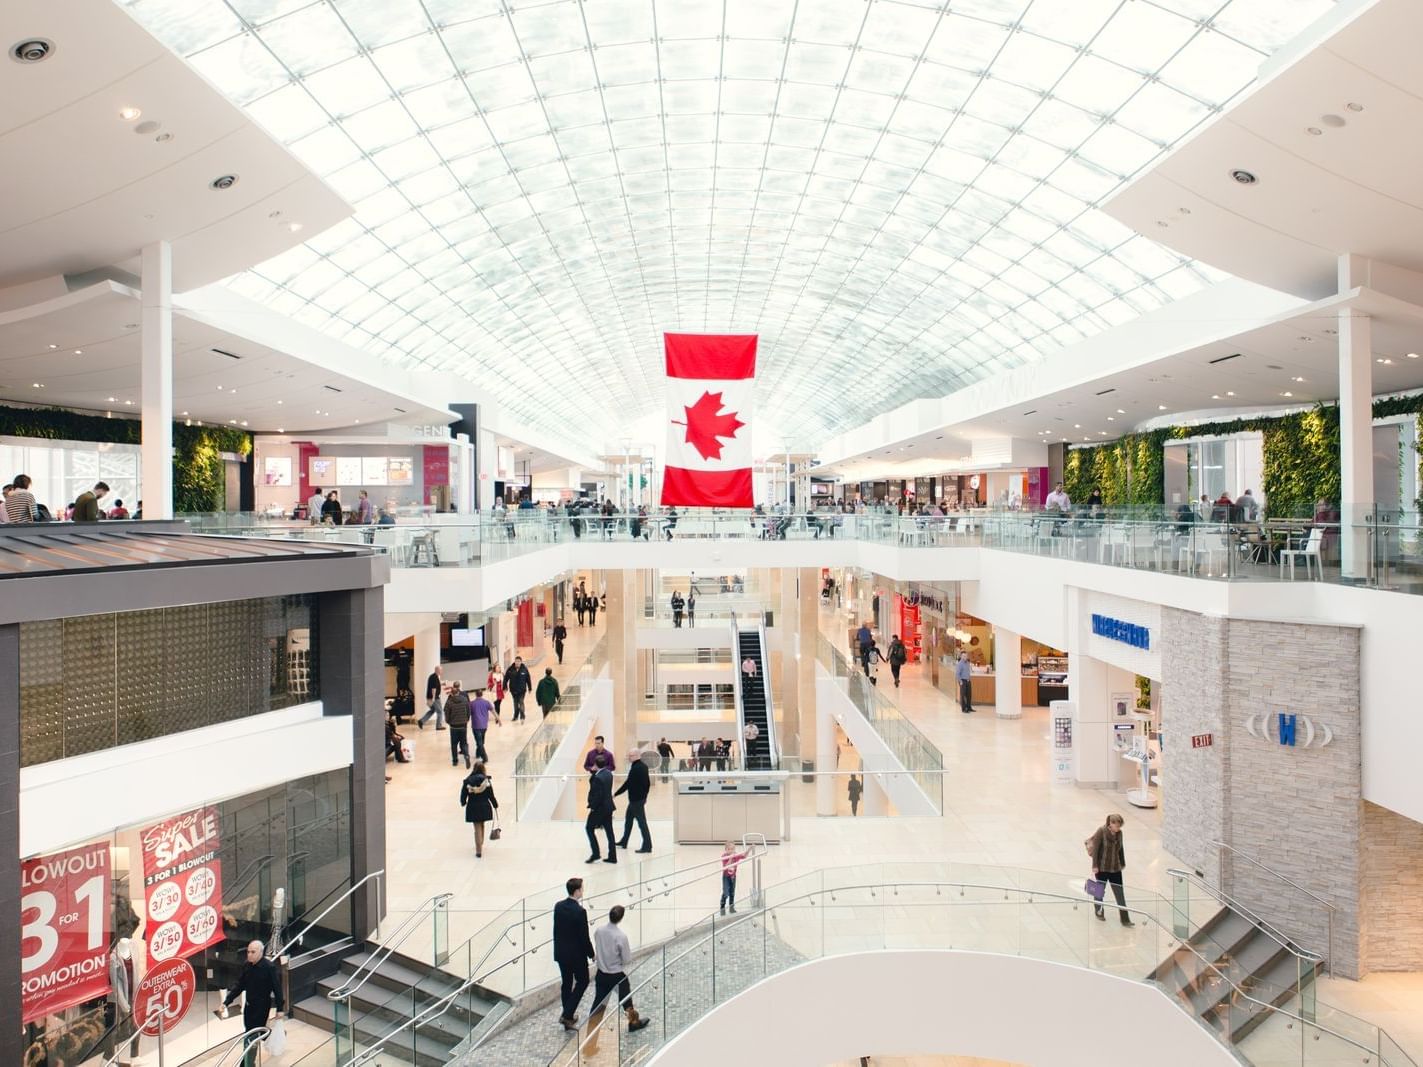 Interior view of South Centre Mall near Carriage House Hotel